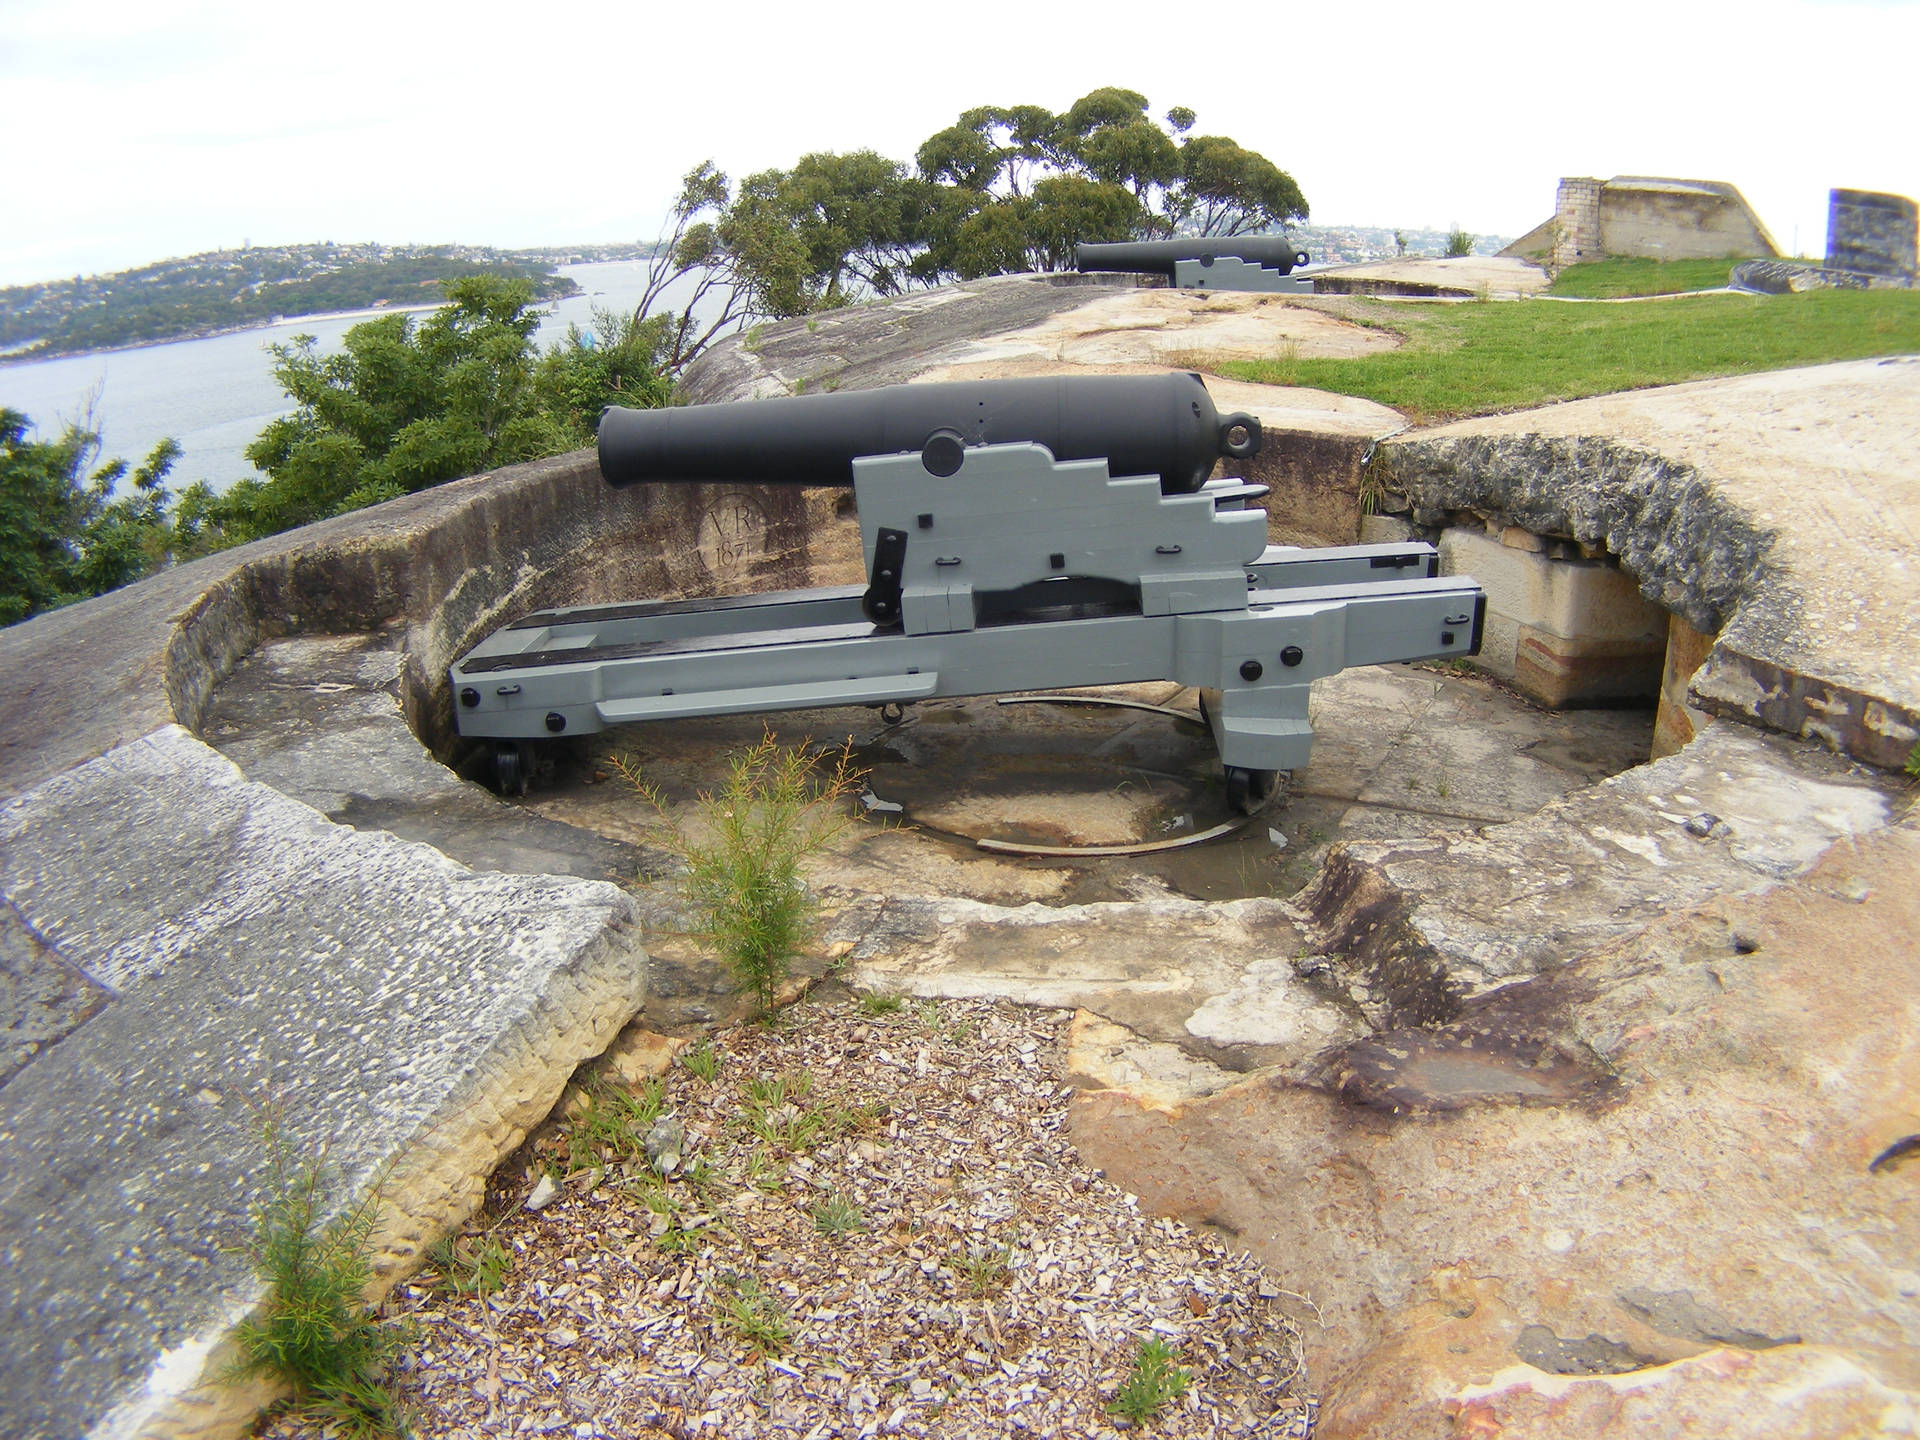 Sydney Georges Head Battery